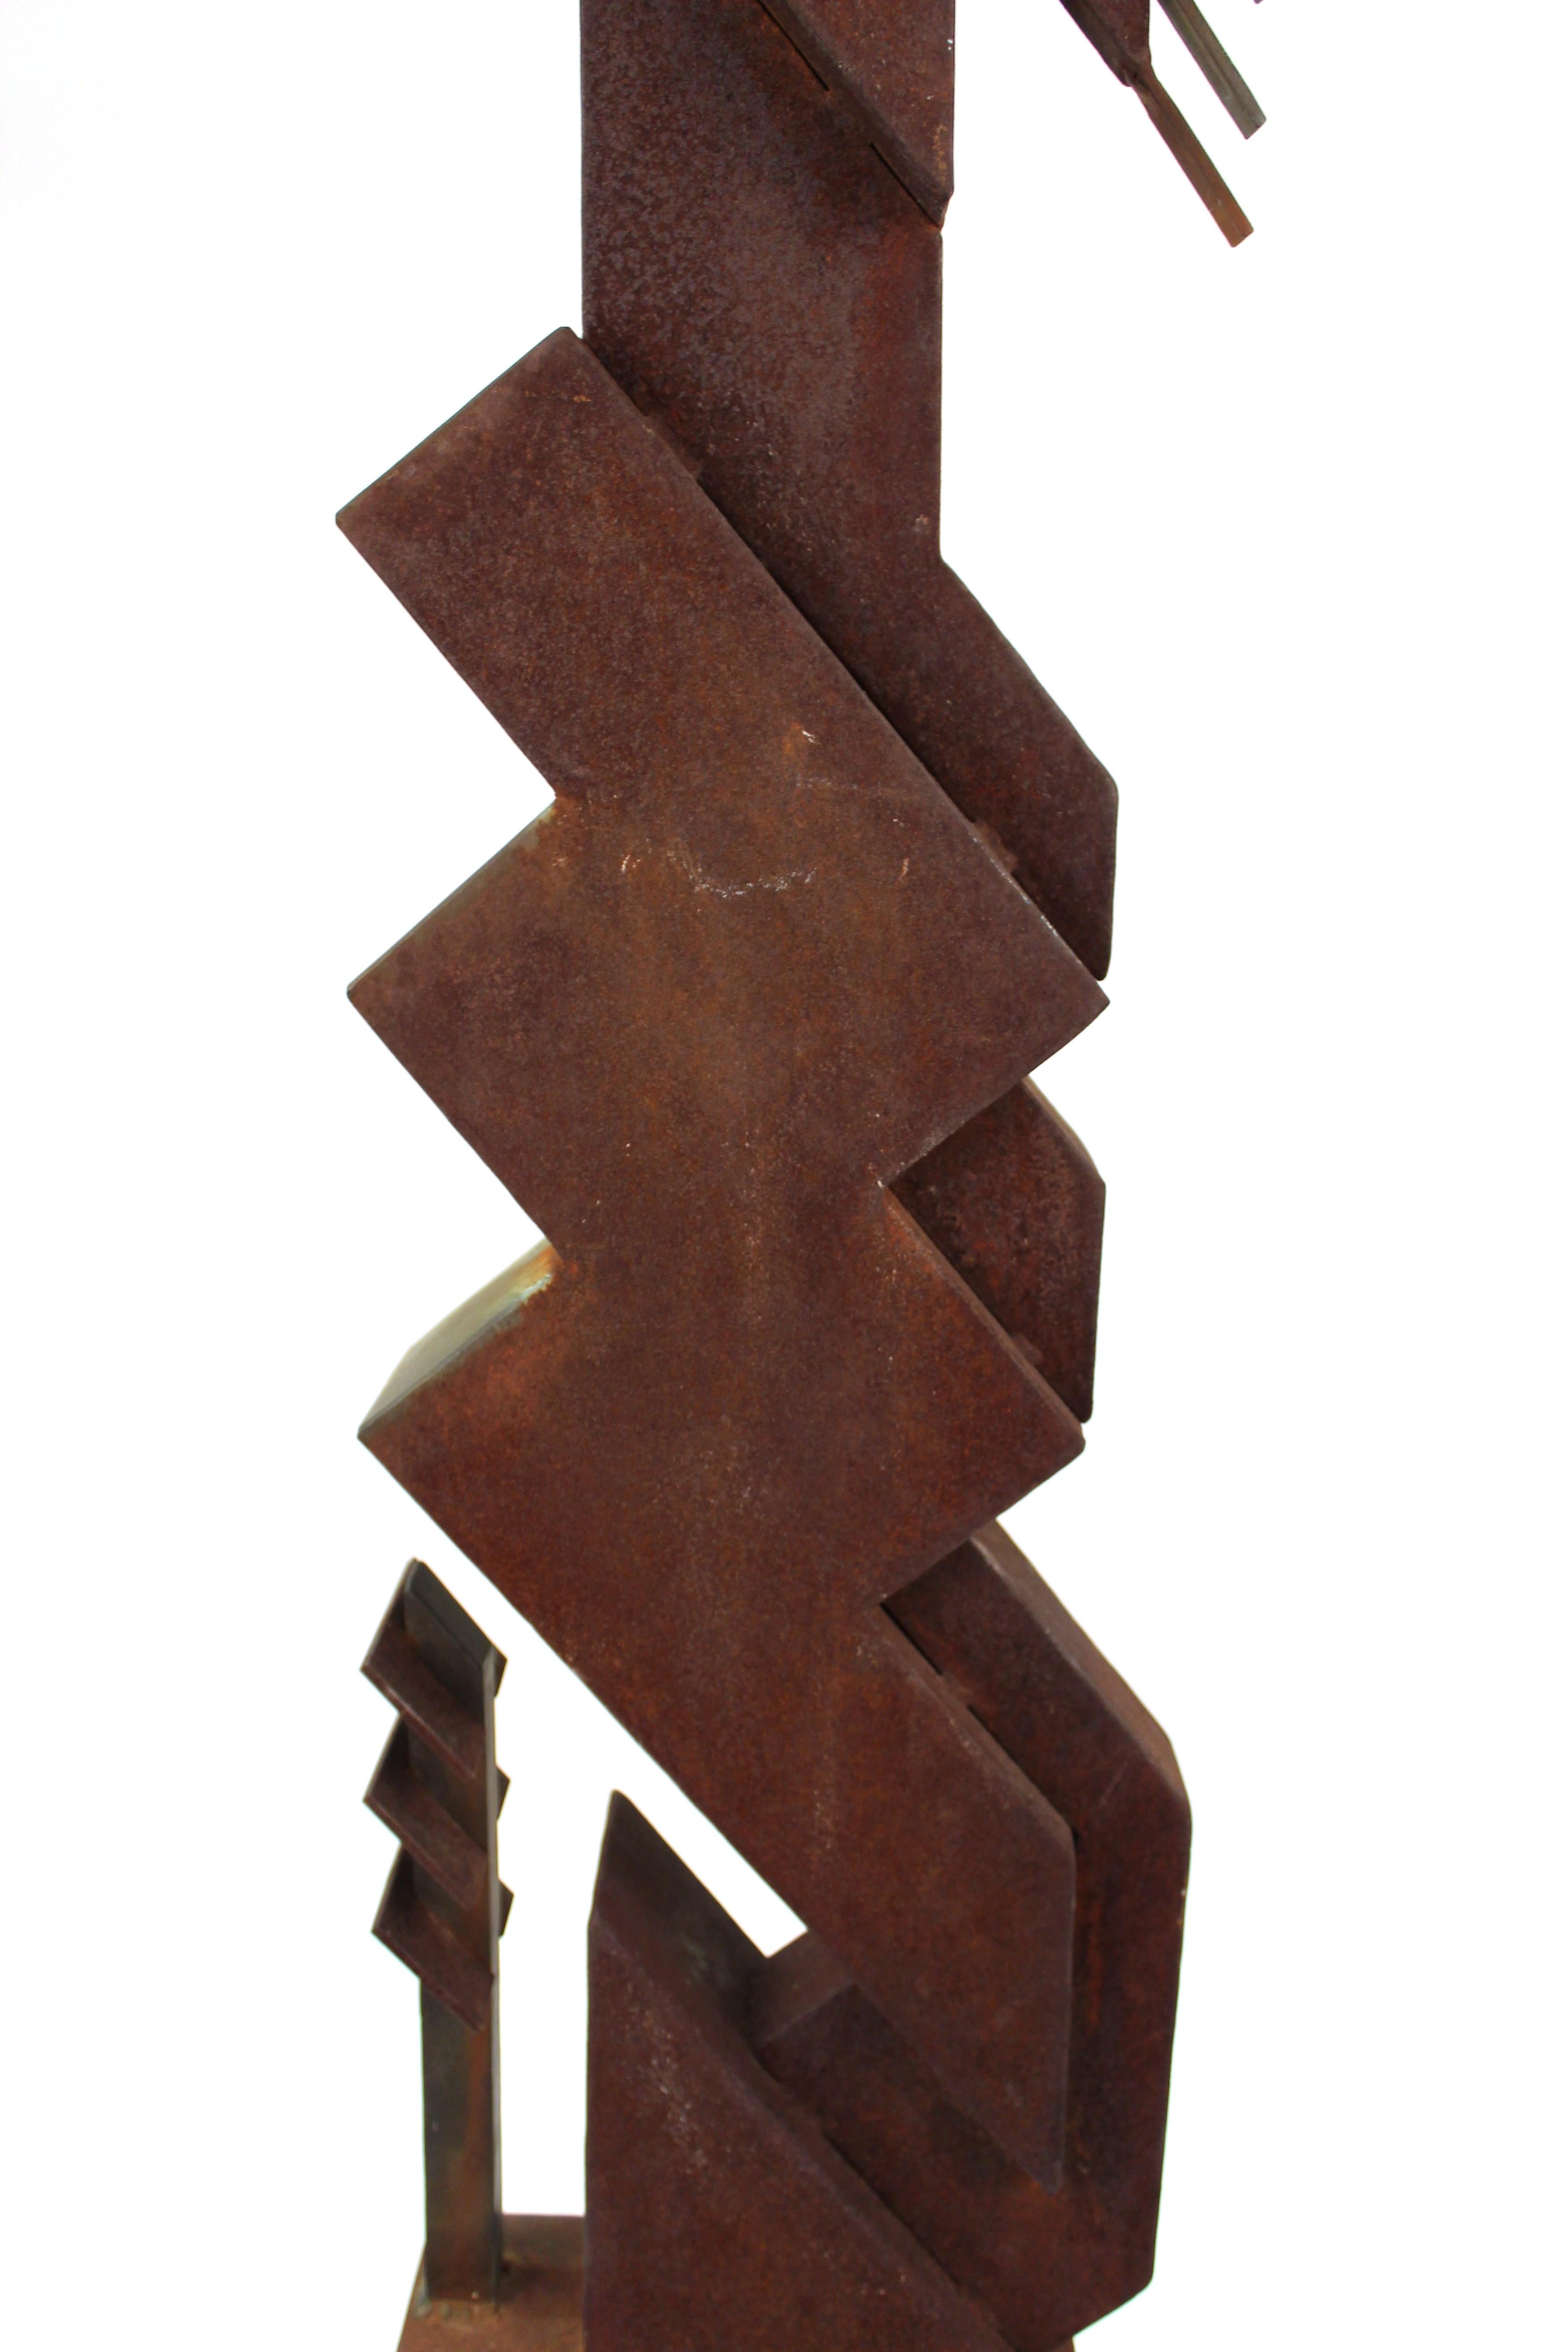 Late 20th Century American Modern Abstract Brutalist TOTEM Sculpture For Sale